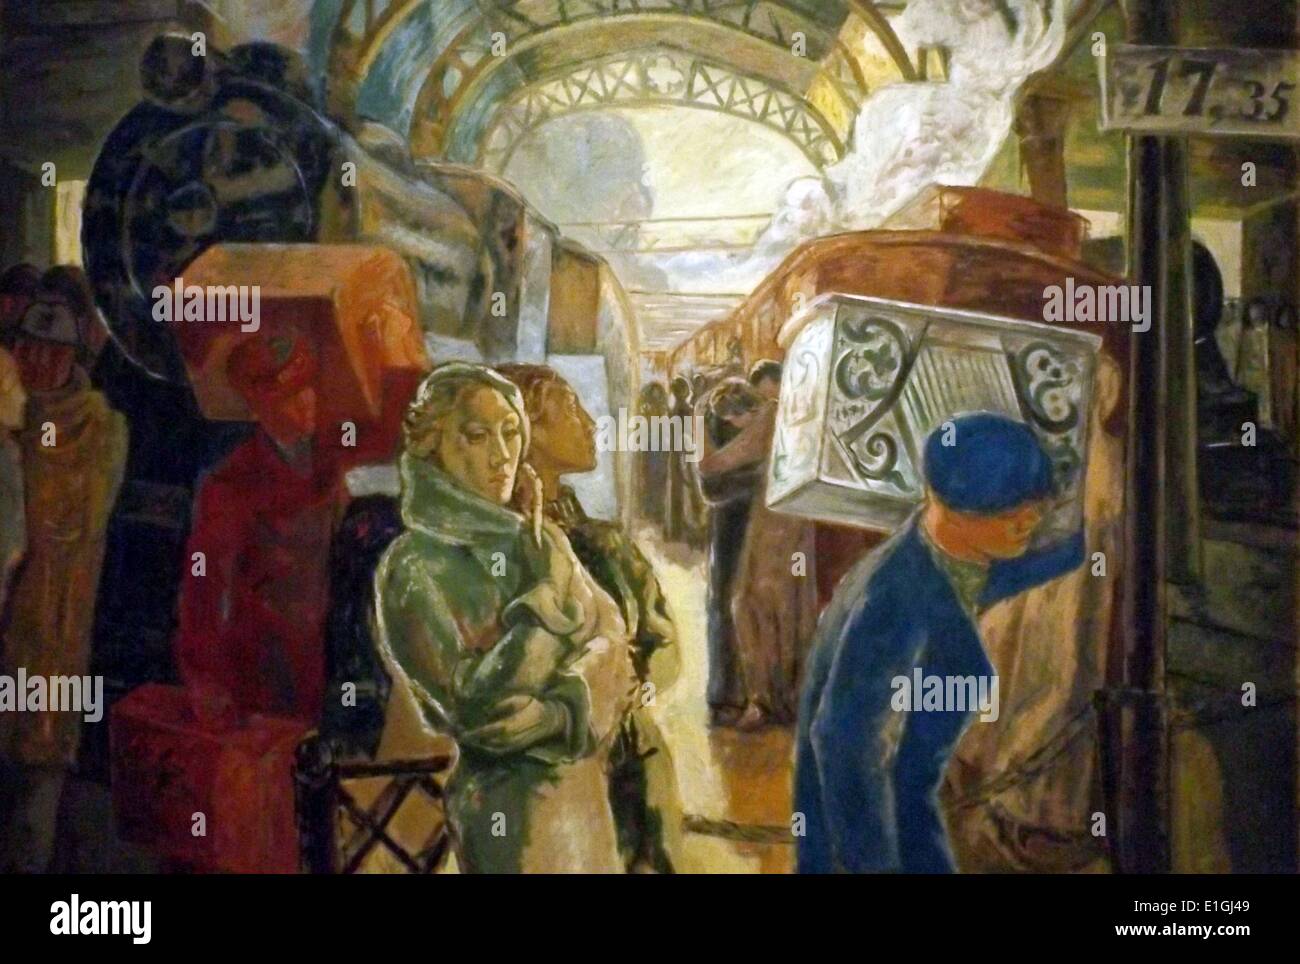 The Railway Station, 1932 by Alf Rolfsen (1895-1979).  Oil on canvas. Stock Photo